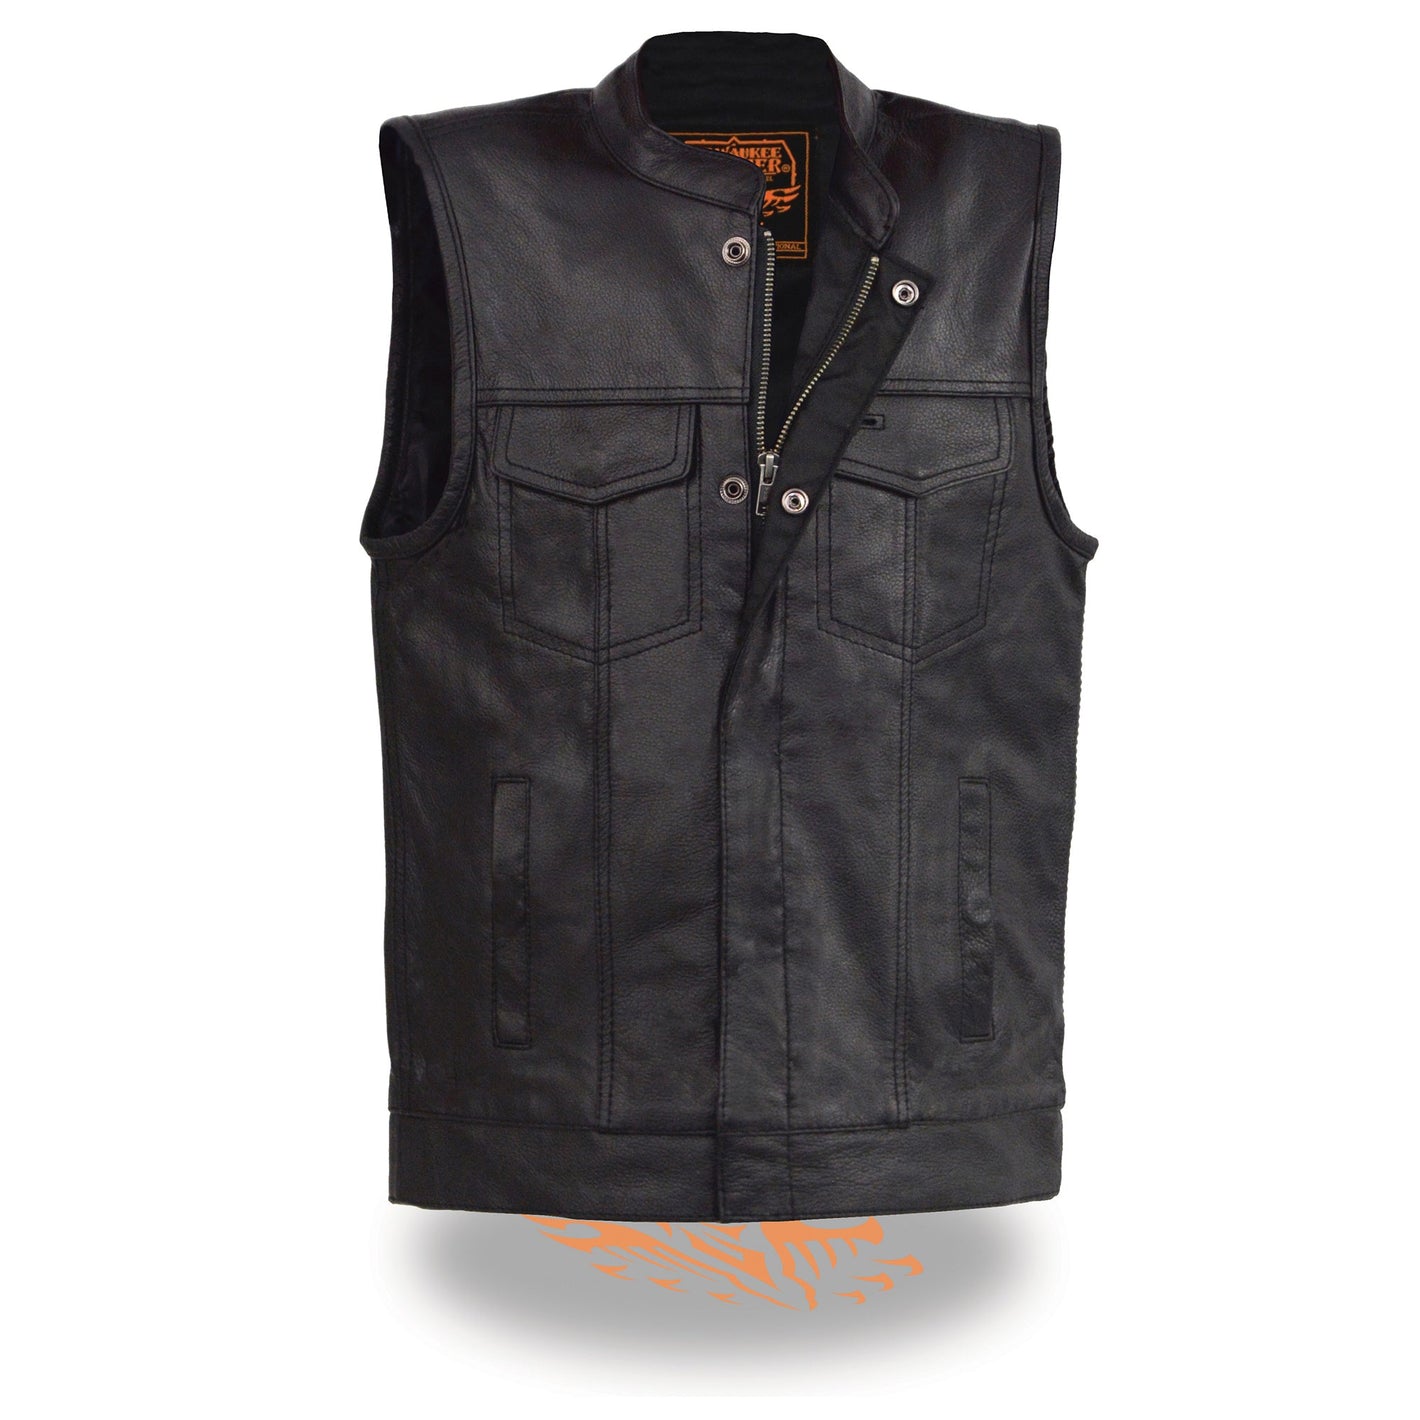 Youth Size Open Neck Snap/Zip Front Club Style Vest